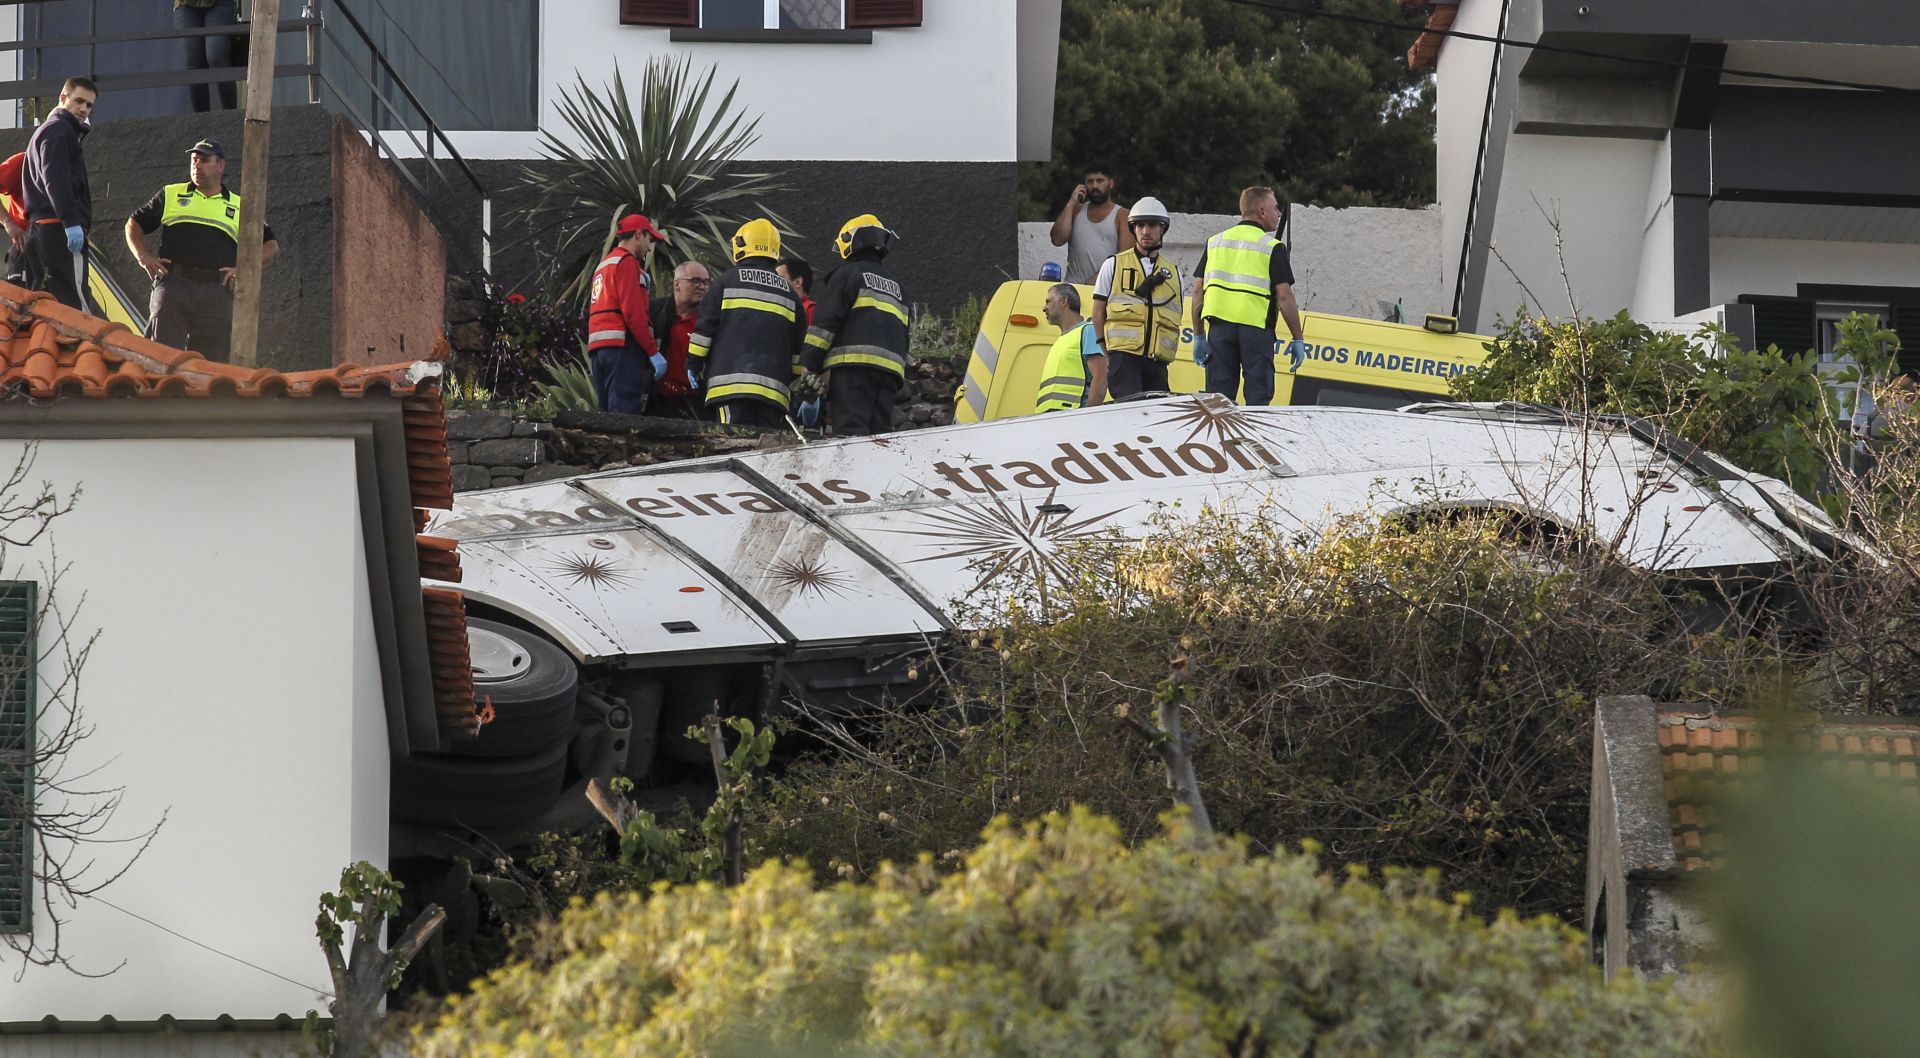 epa07512748 Emergency services inspect the scene of a tourist bus crash in Canico, Santa Cruz, Madeira Island, Portugal, 17 April 2019. According the Civil Protection of Madeira, several people died in the accident.  EPA/HOMEM GOUVEIA